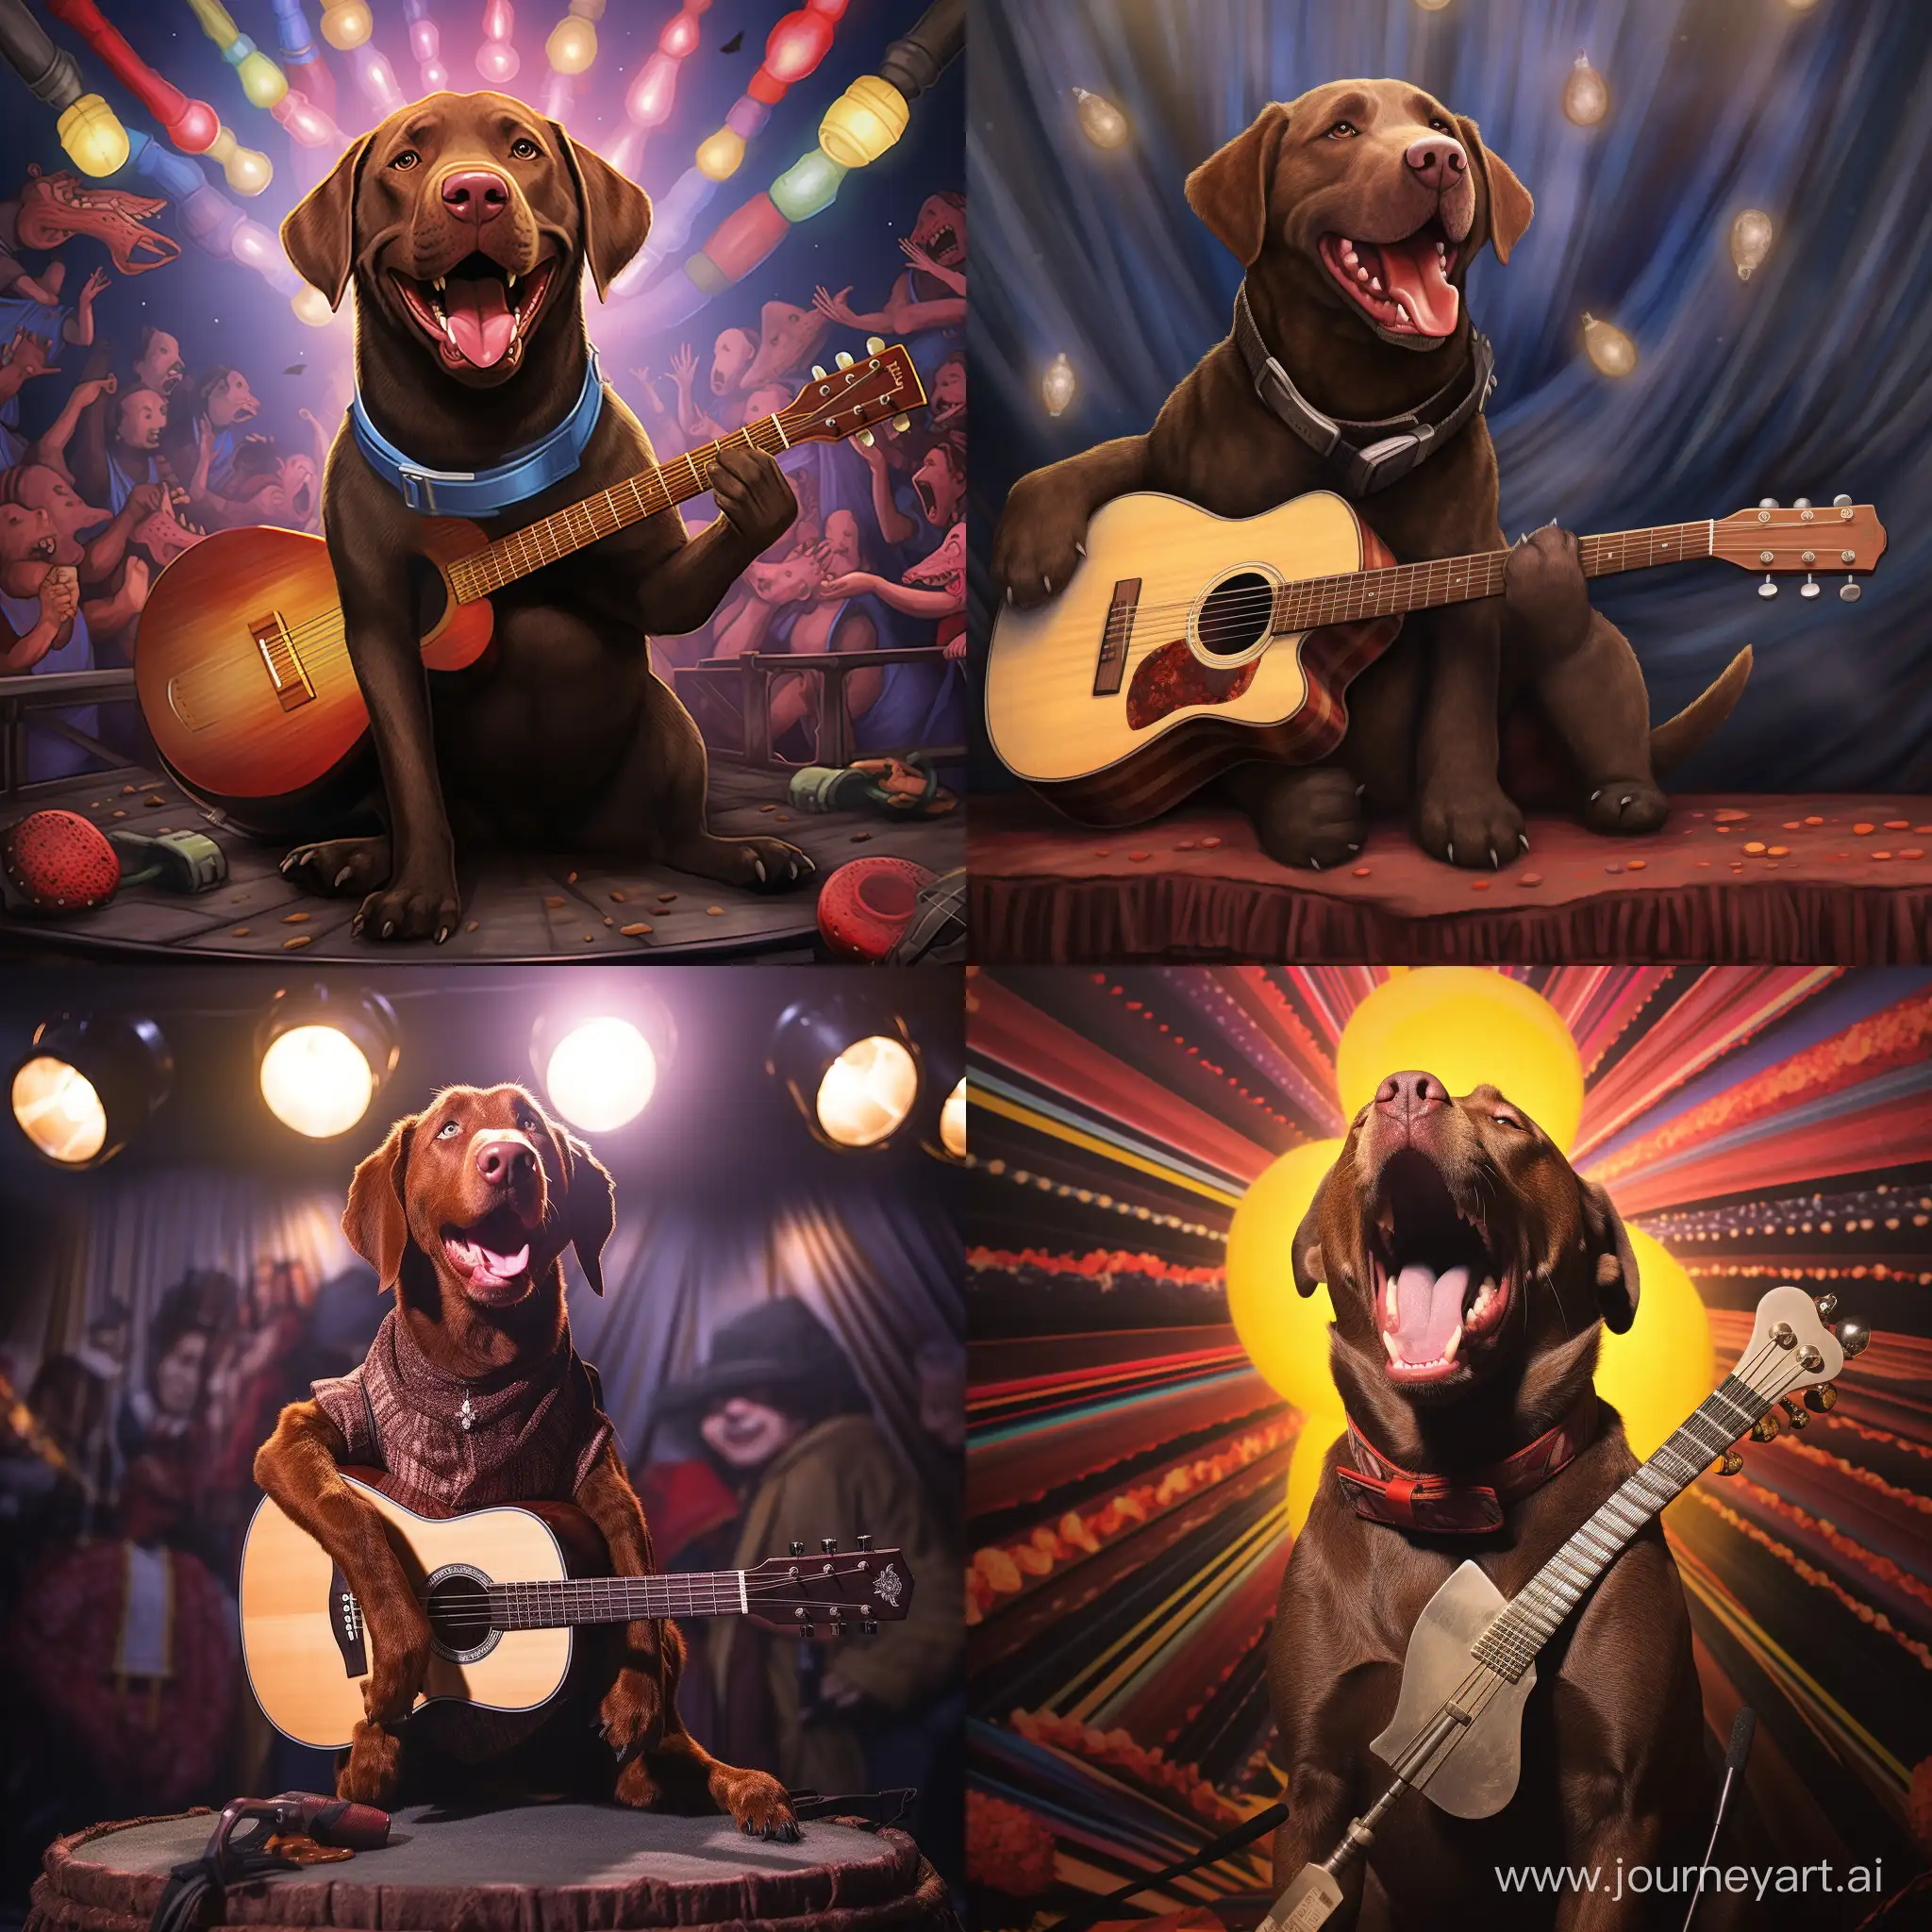 Chocolate lab singing and playing guitar on stage